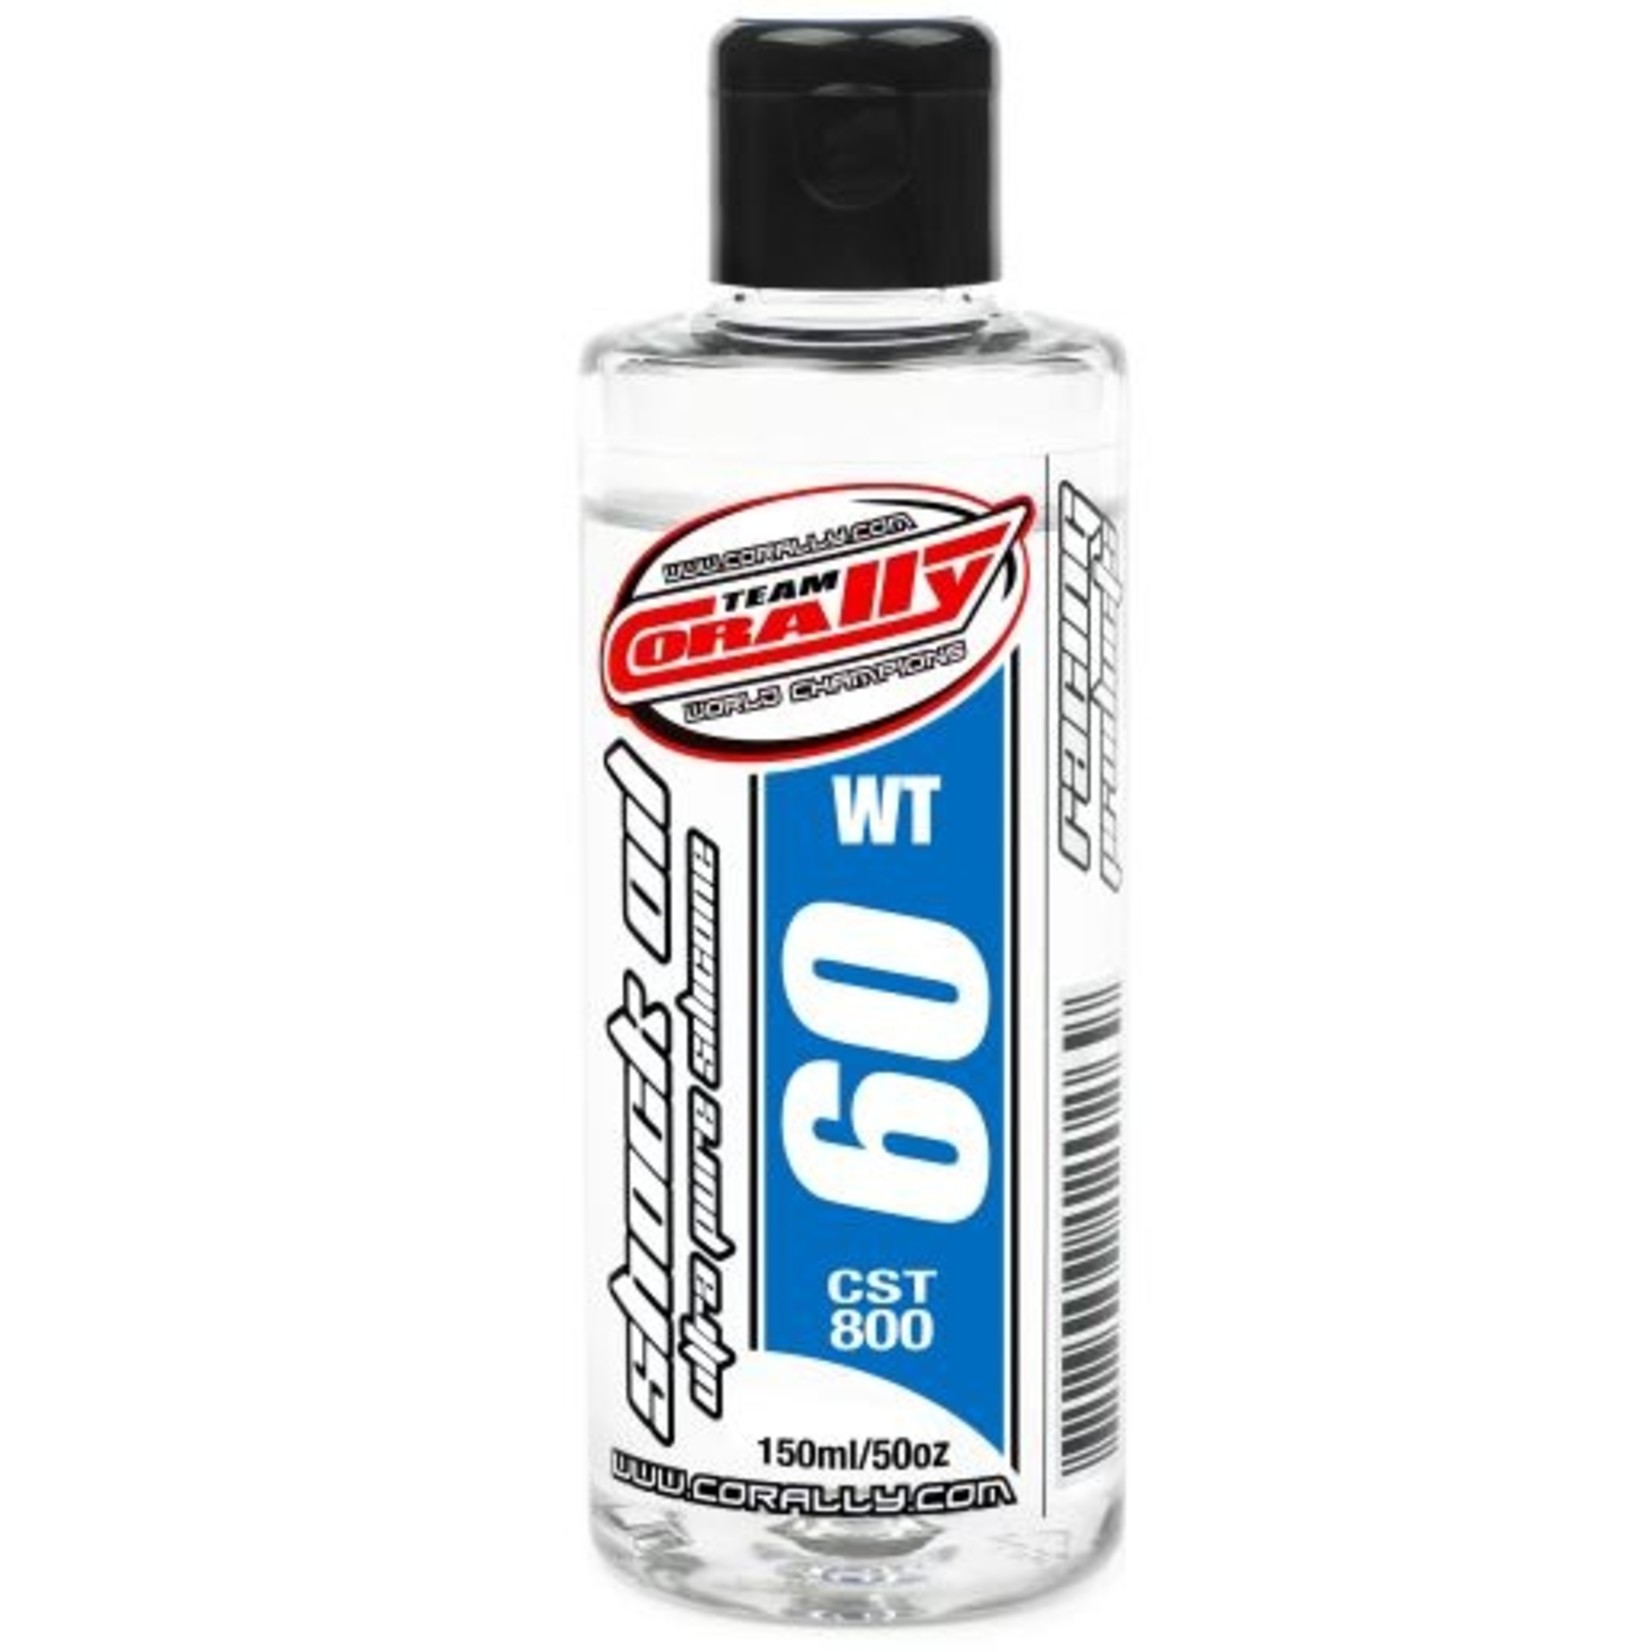 Corally (Team Corally) Ultra Pure Silicone Shock Oil - 60 WT - 150ml